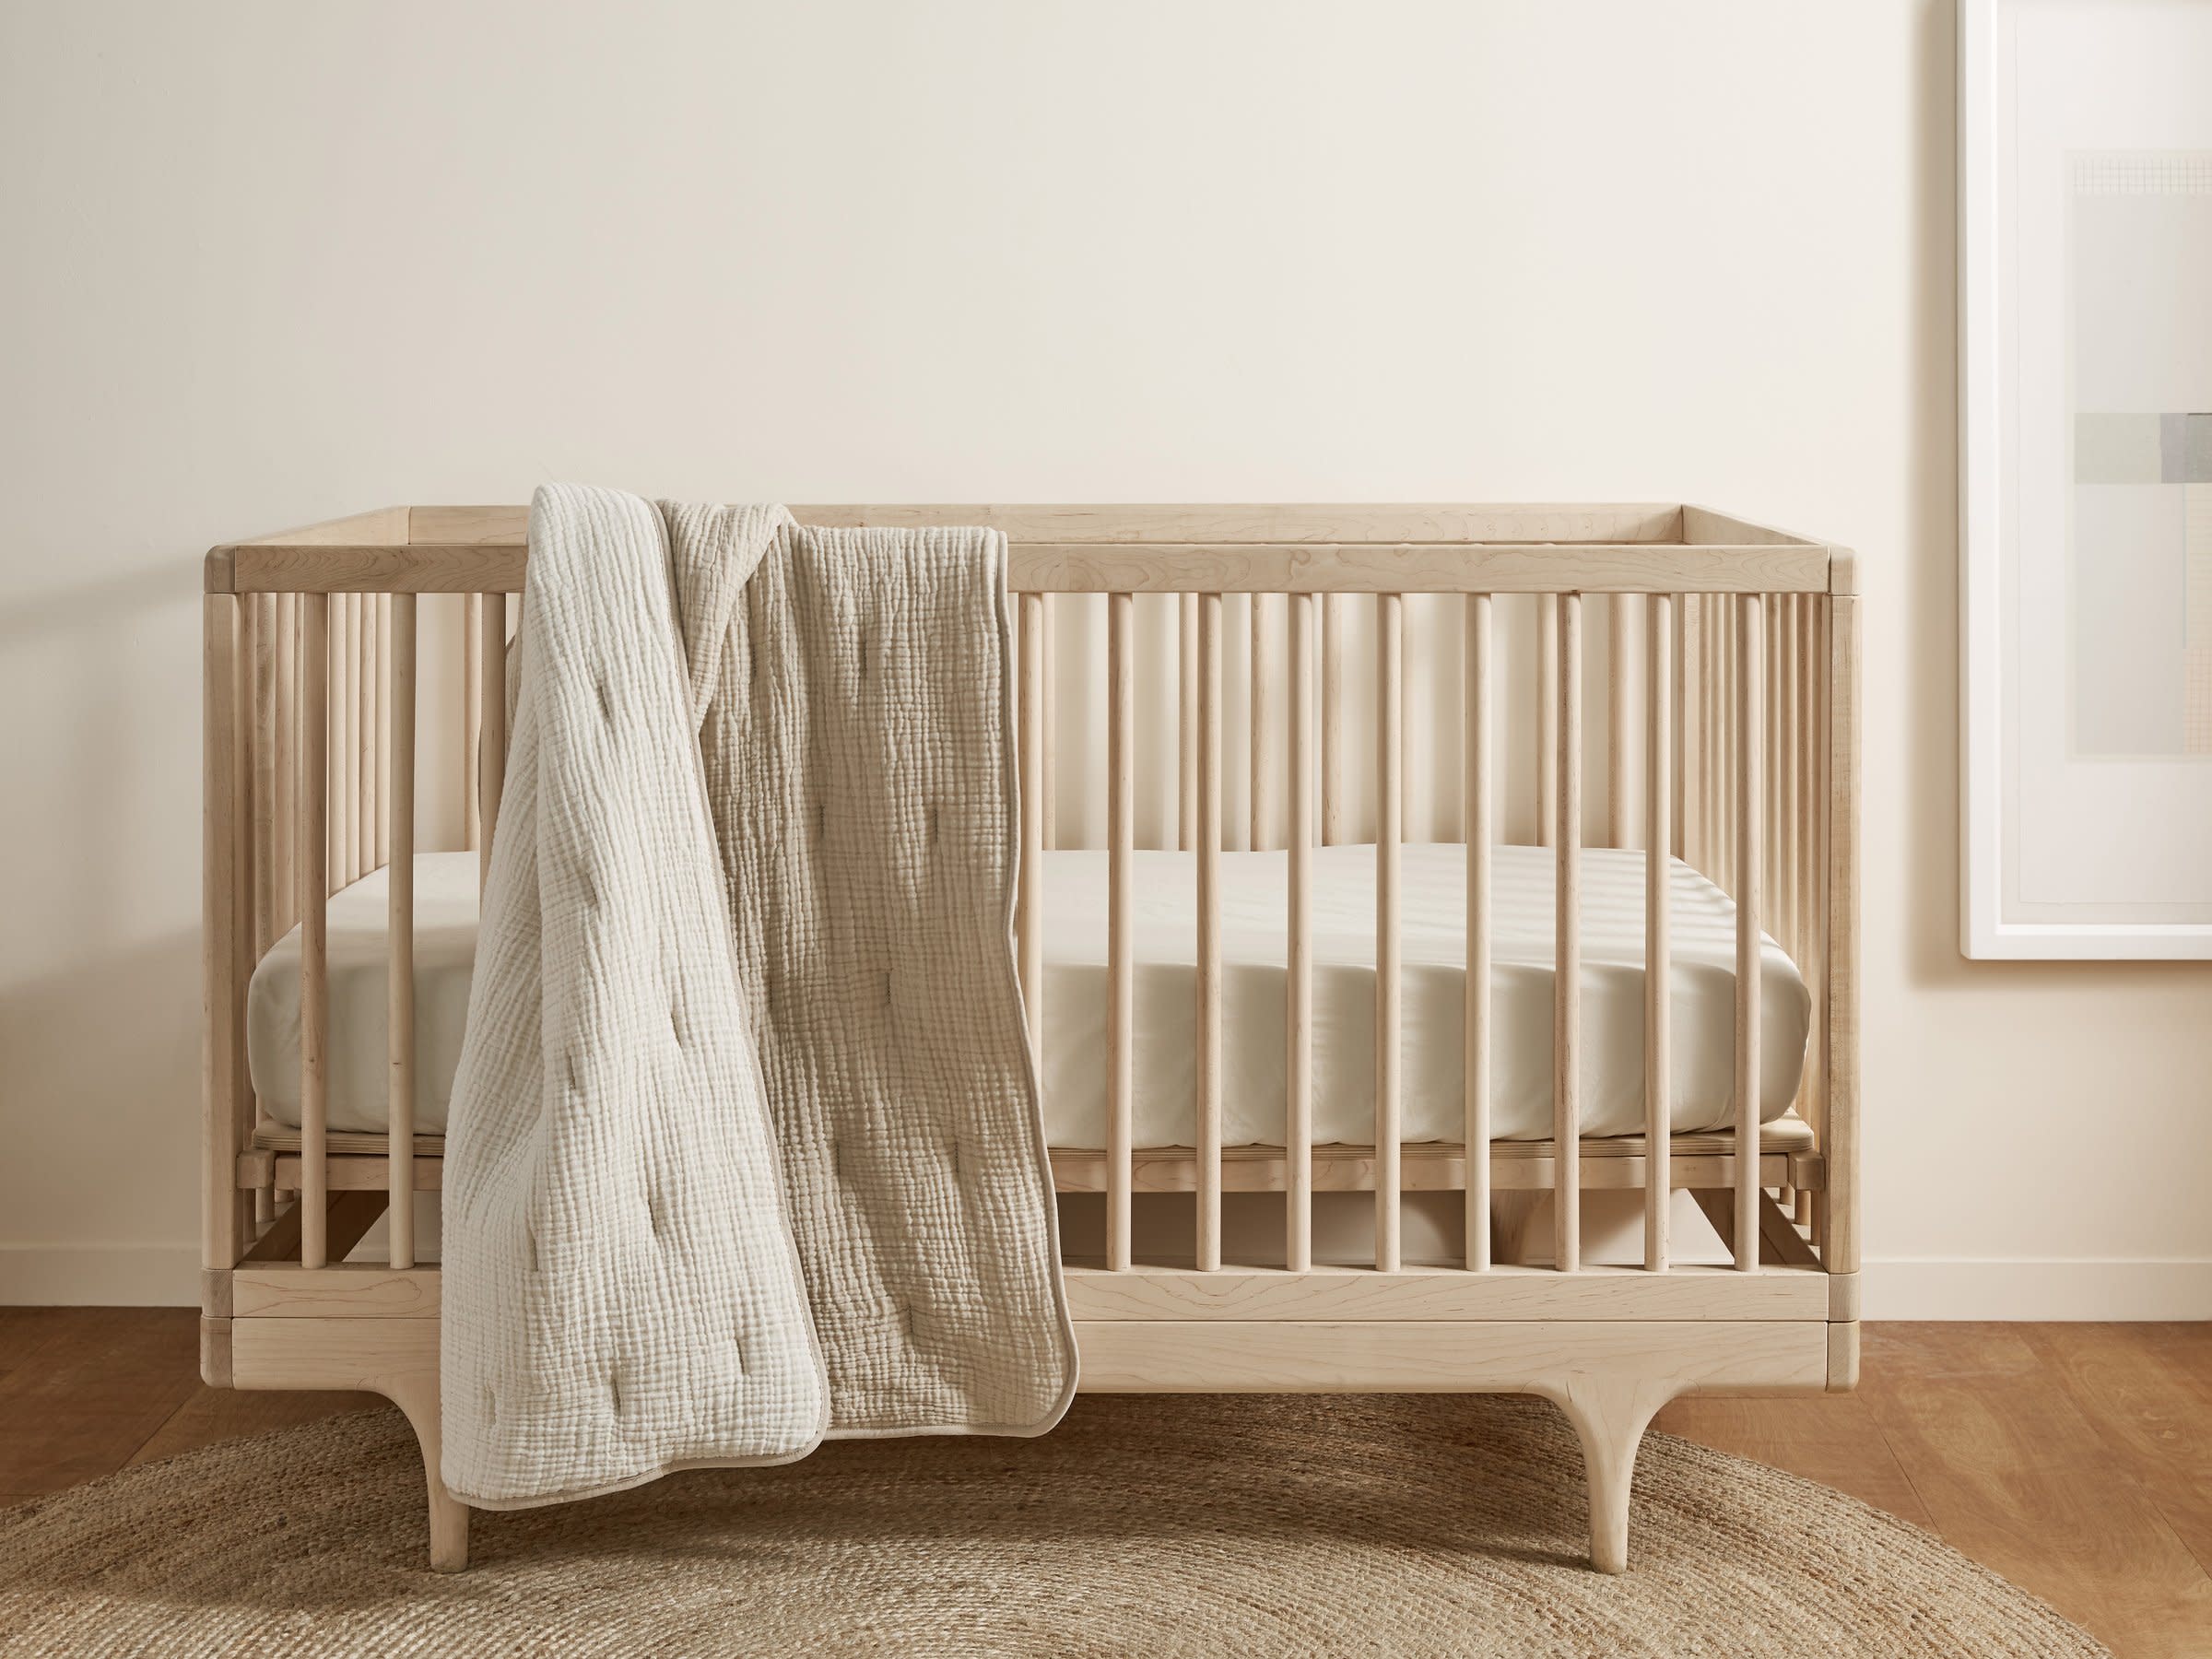 Ivory Brushed Cotton Crib Sheet Shown In A Room